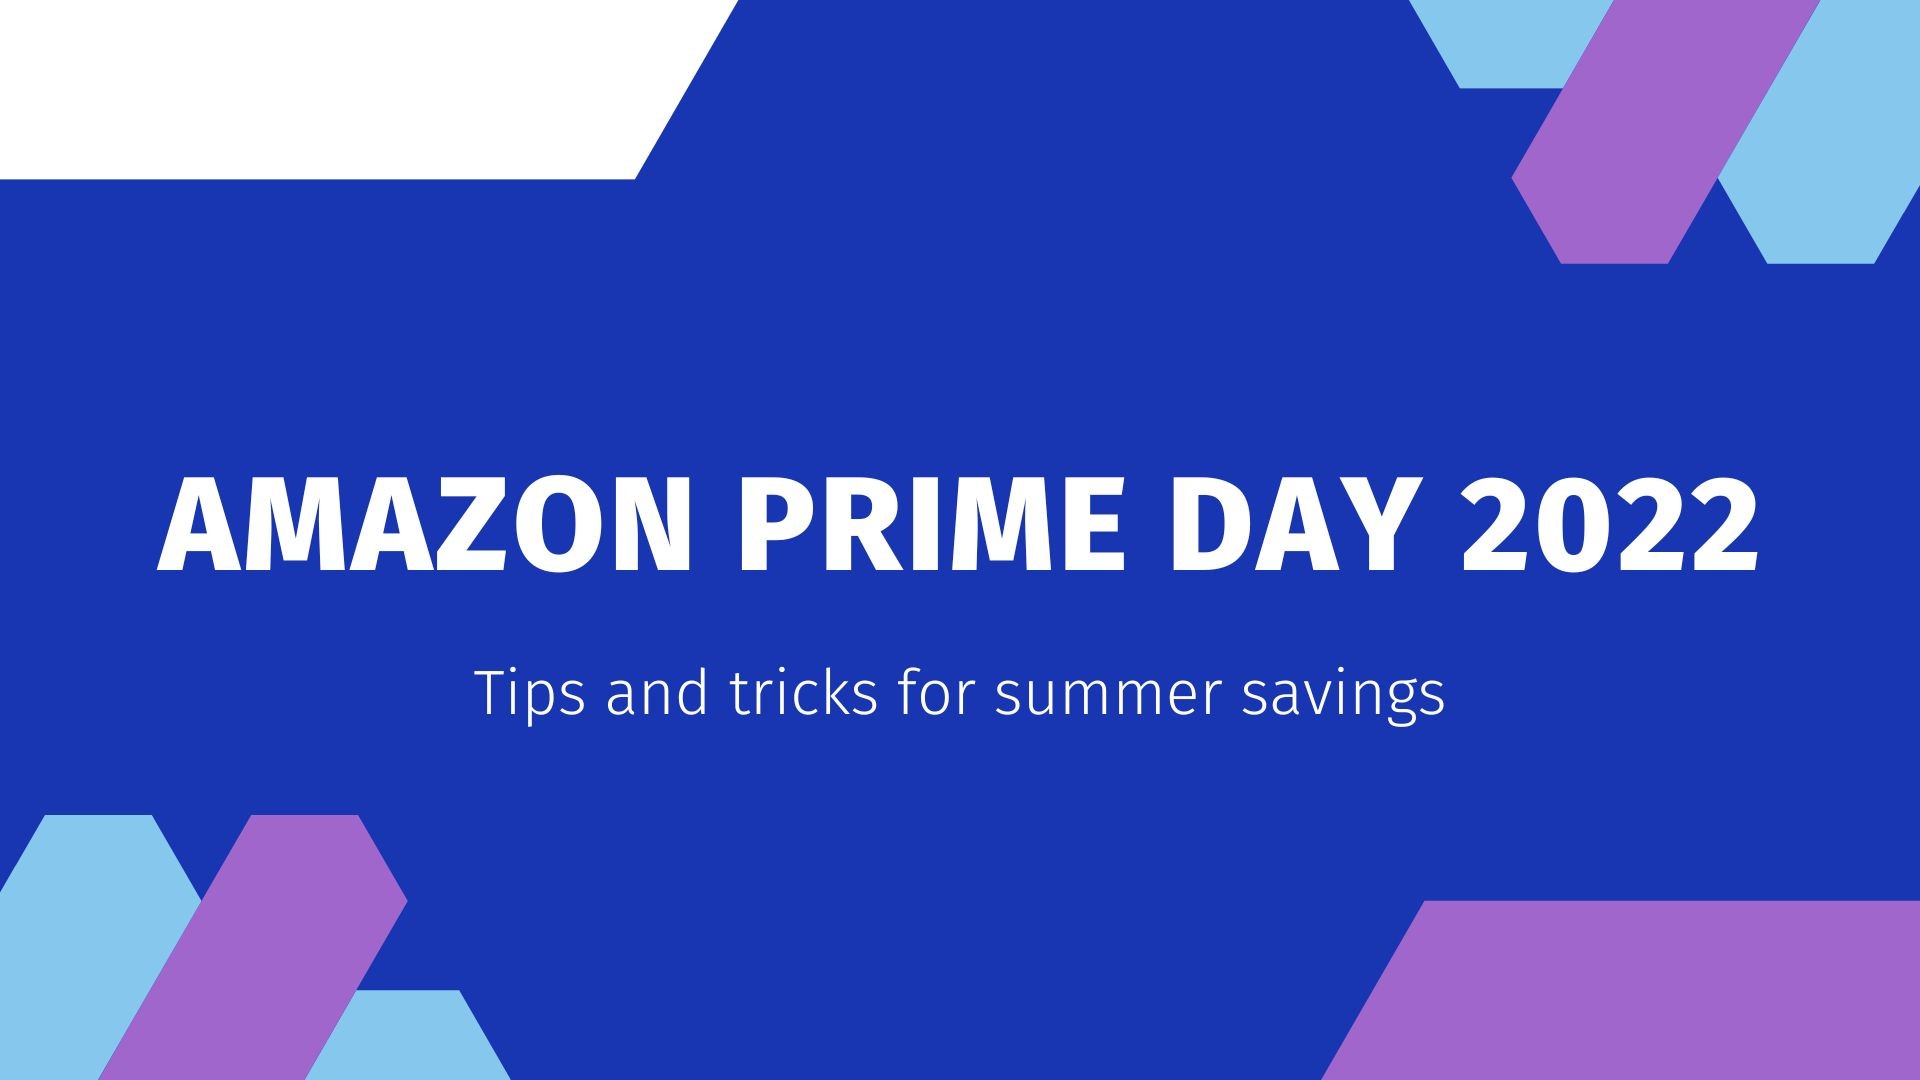 A quick look at how to stay safe while shopping online for the two-day Amazon Prime event, as well as how you can make sure you get the best deal.